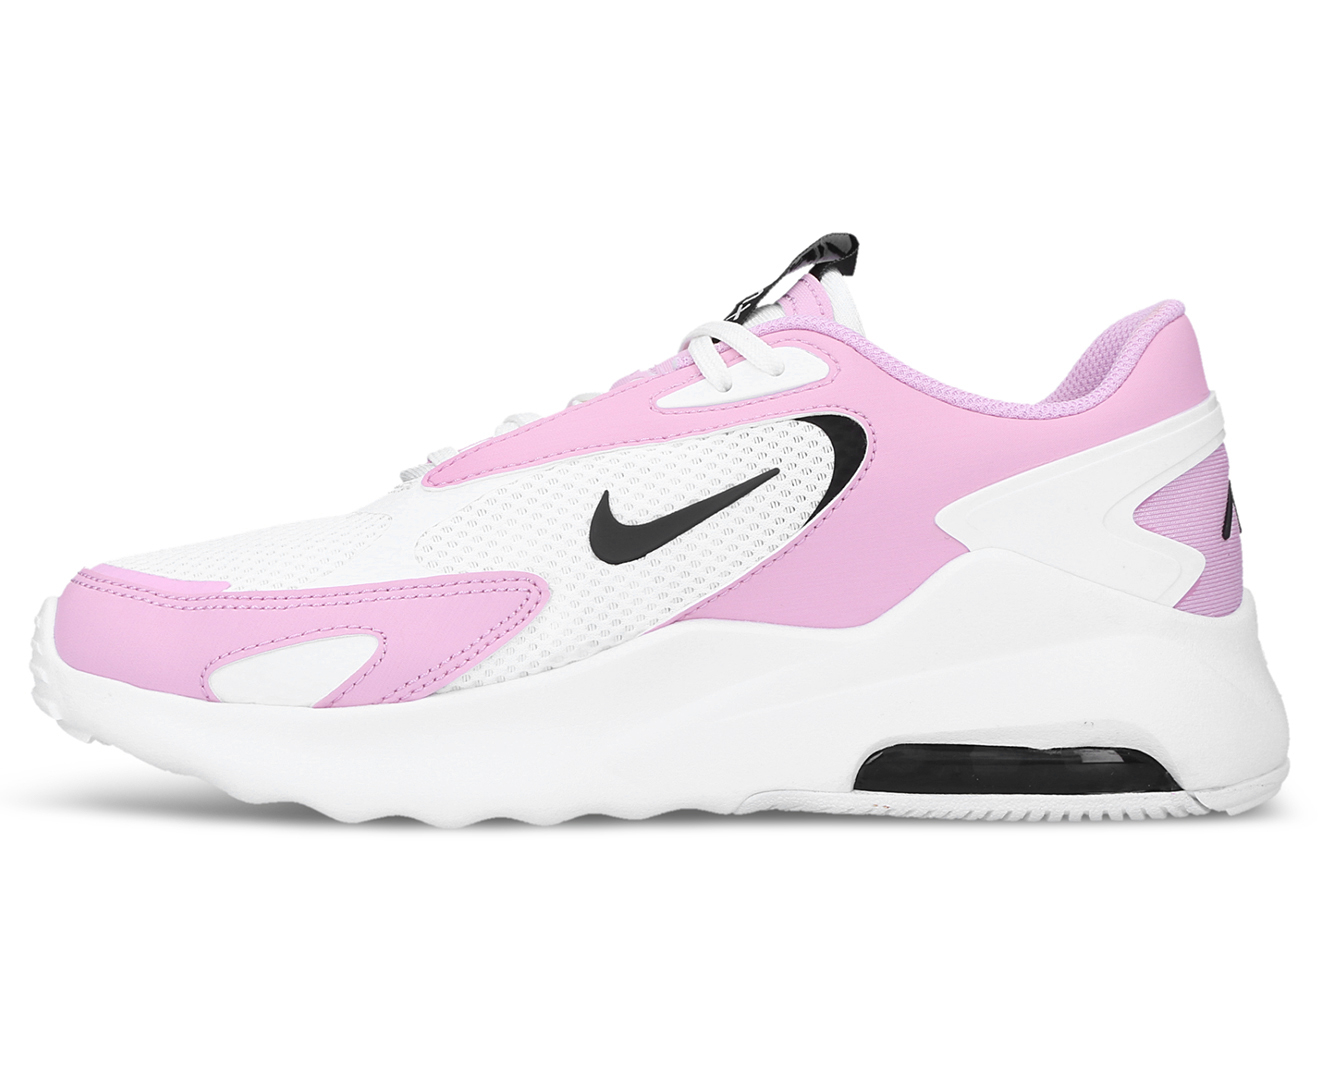 Nike Women's Air Max Bolt Sneakers - White/Black/Arctic Pink | Catch.co.nz